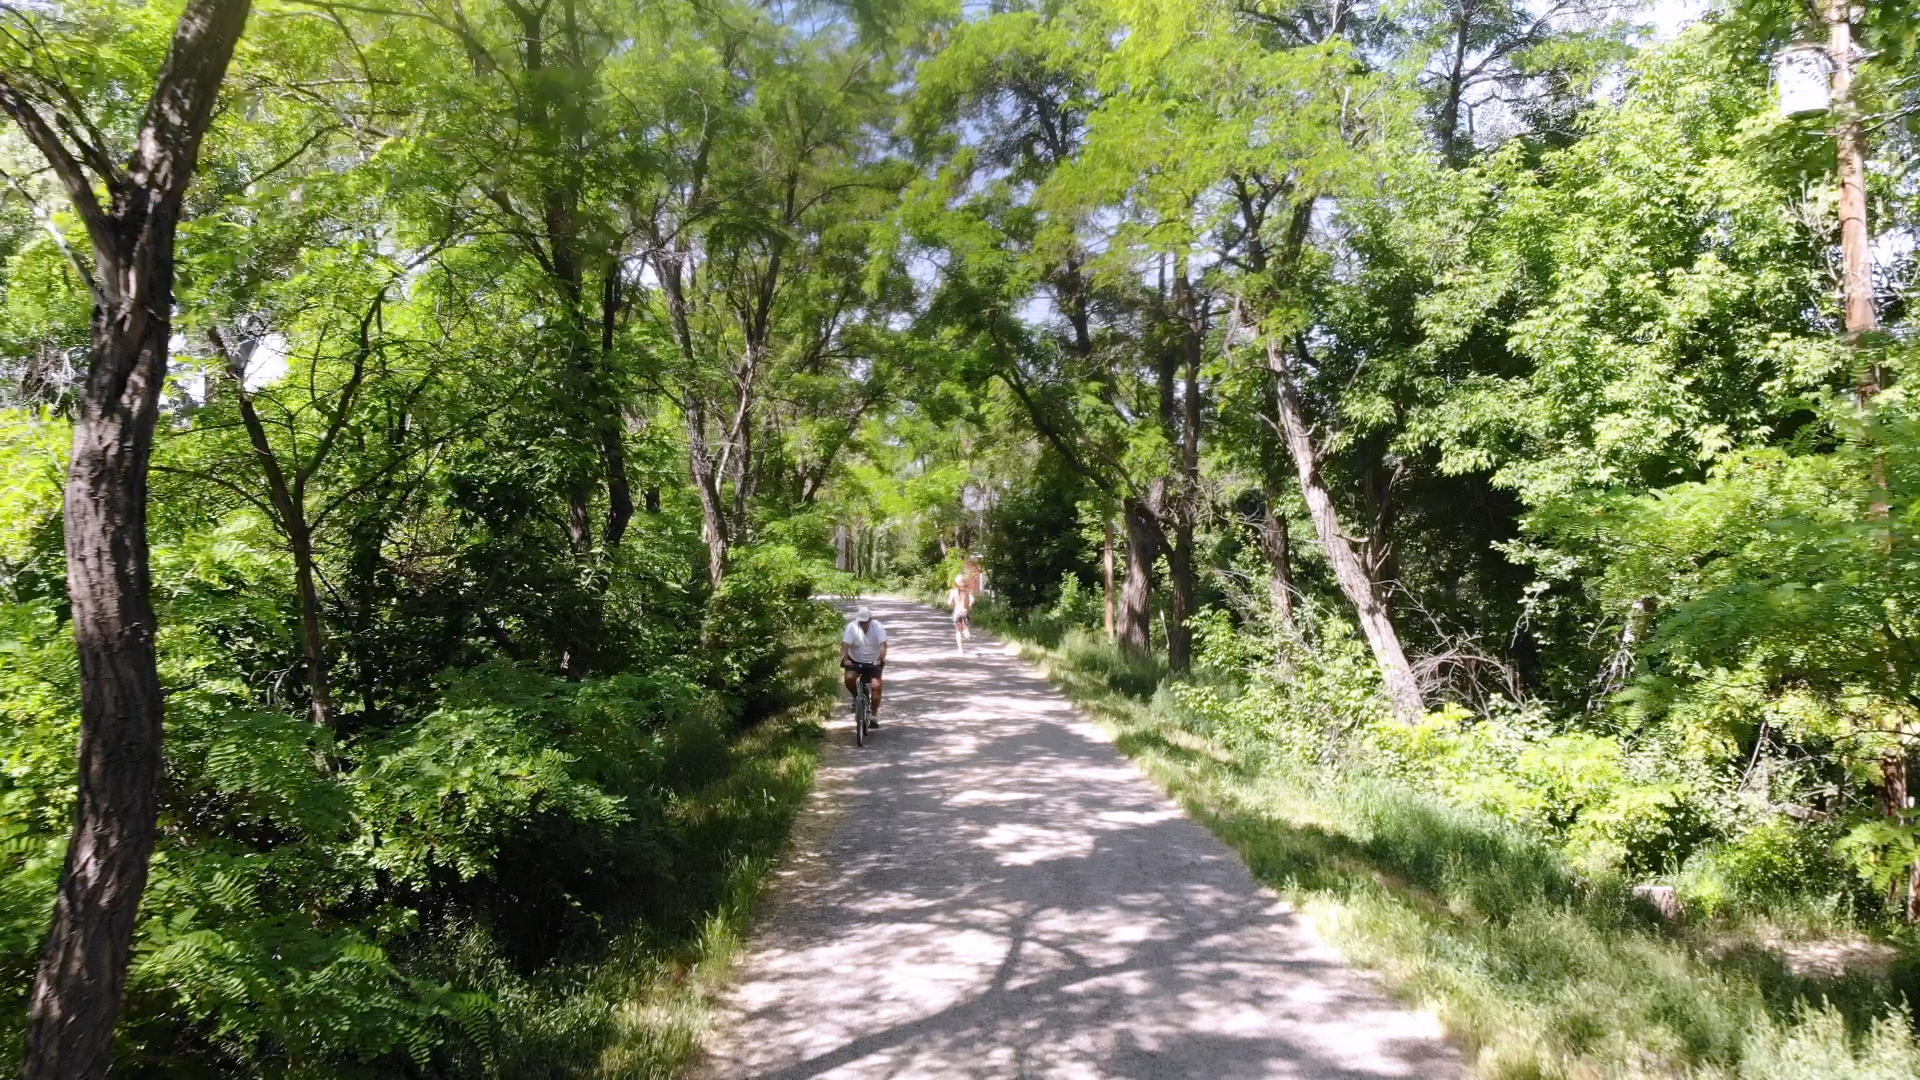 In 2016, about 24,000 trees along the 71-mile High Line Canal corridor were evaluated for safety and tree health conditions.